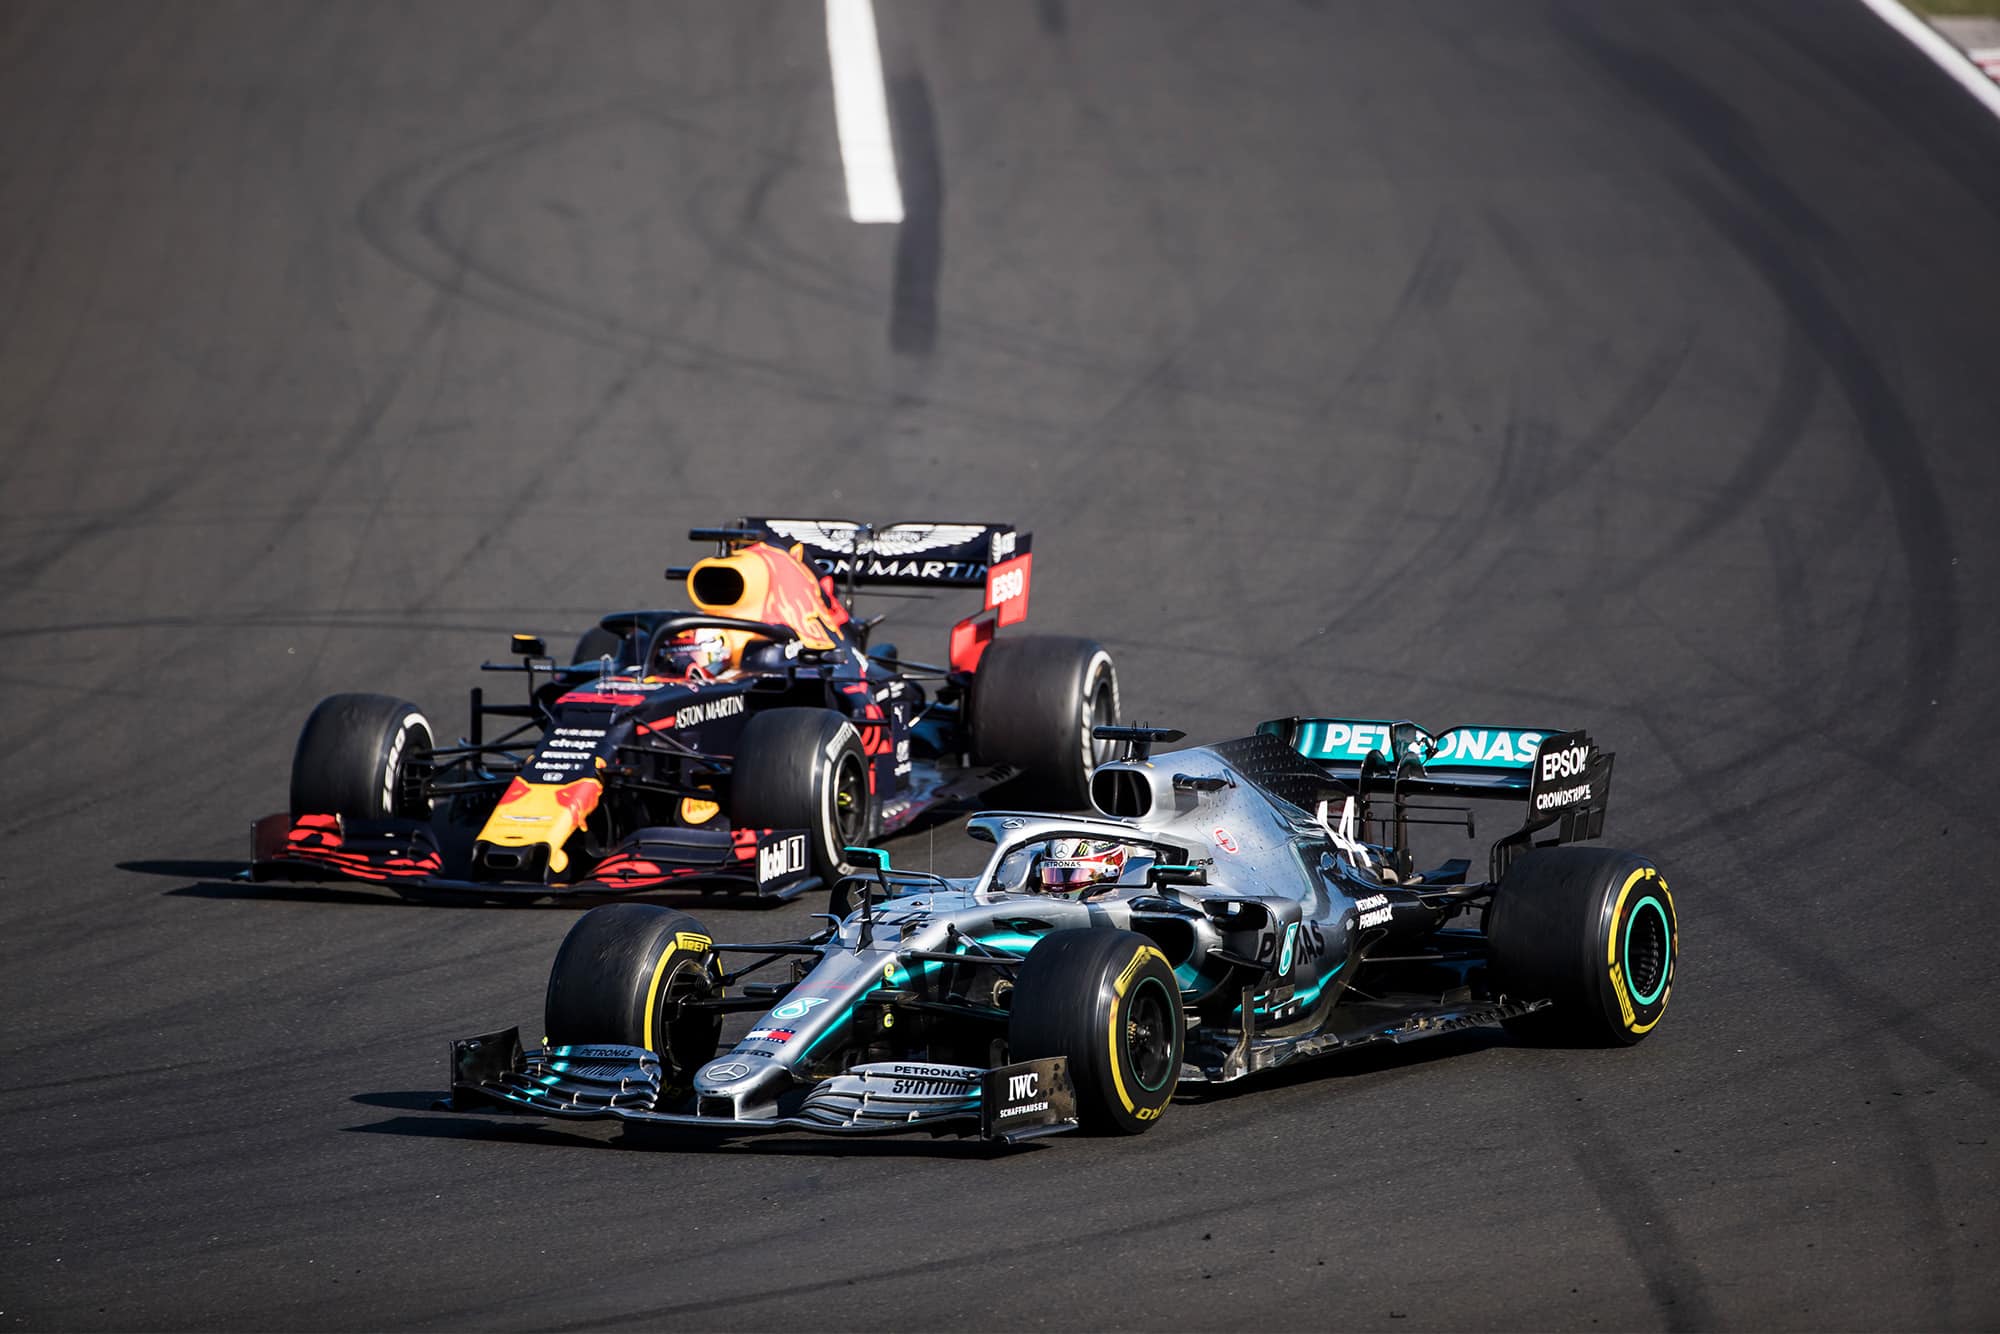 Lewis Hamilton overtakes Max Verstappen for the lead of the Hungarian Grand Prix